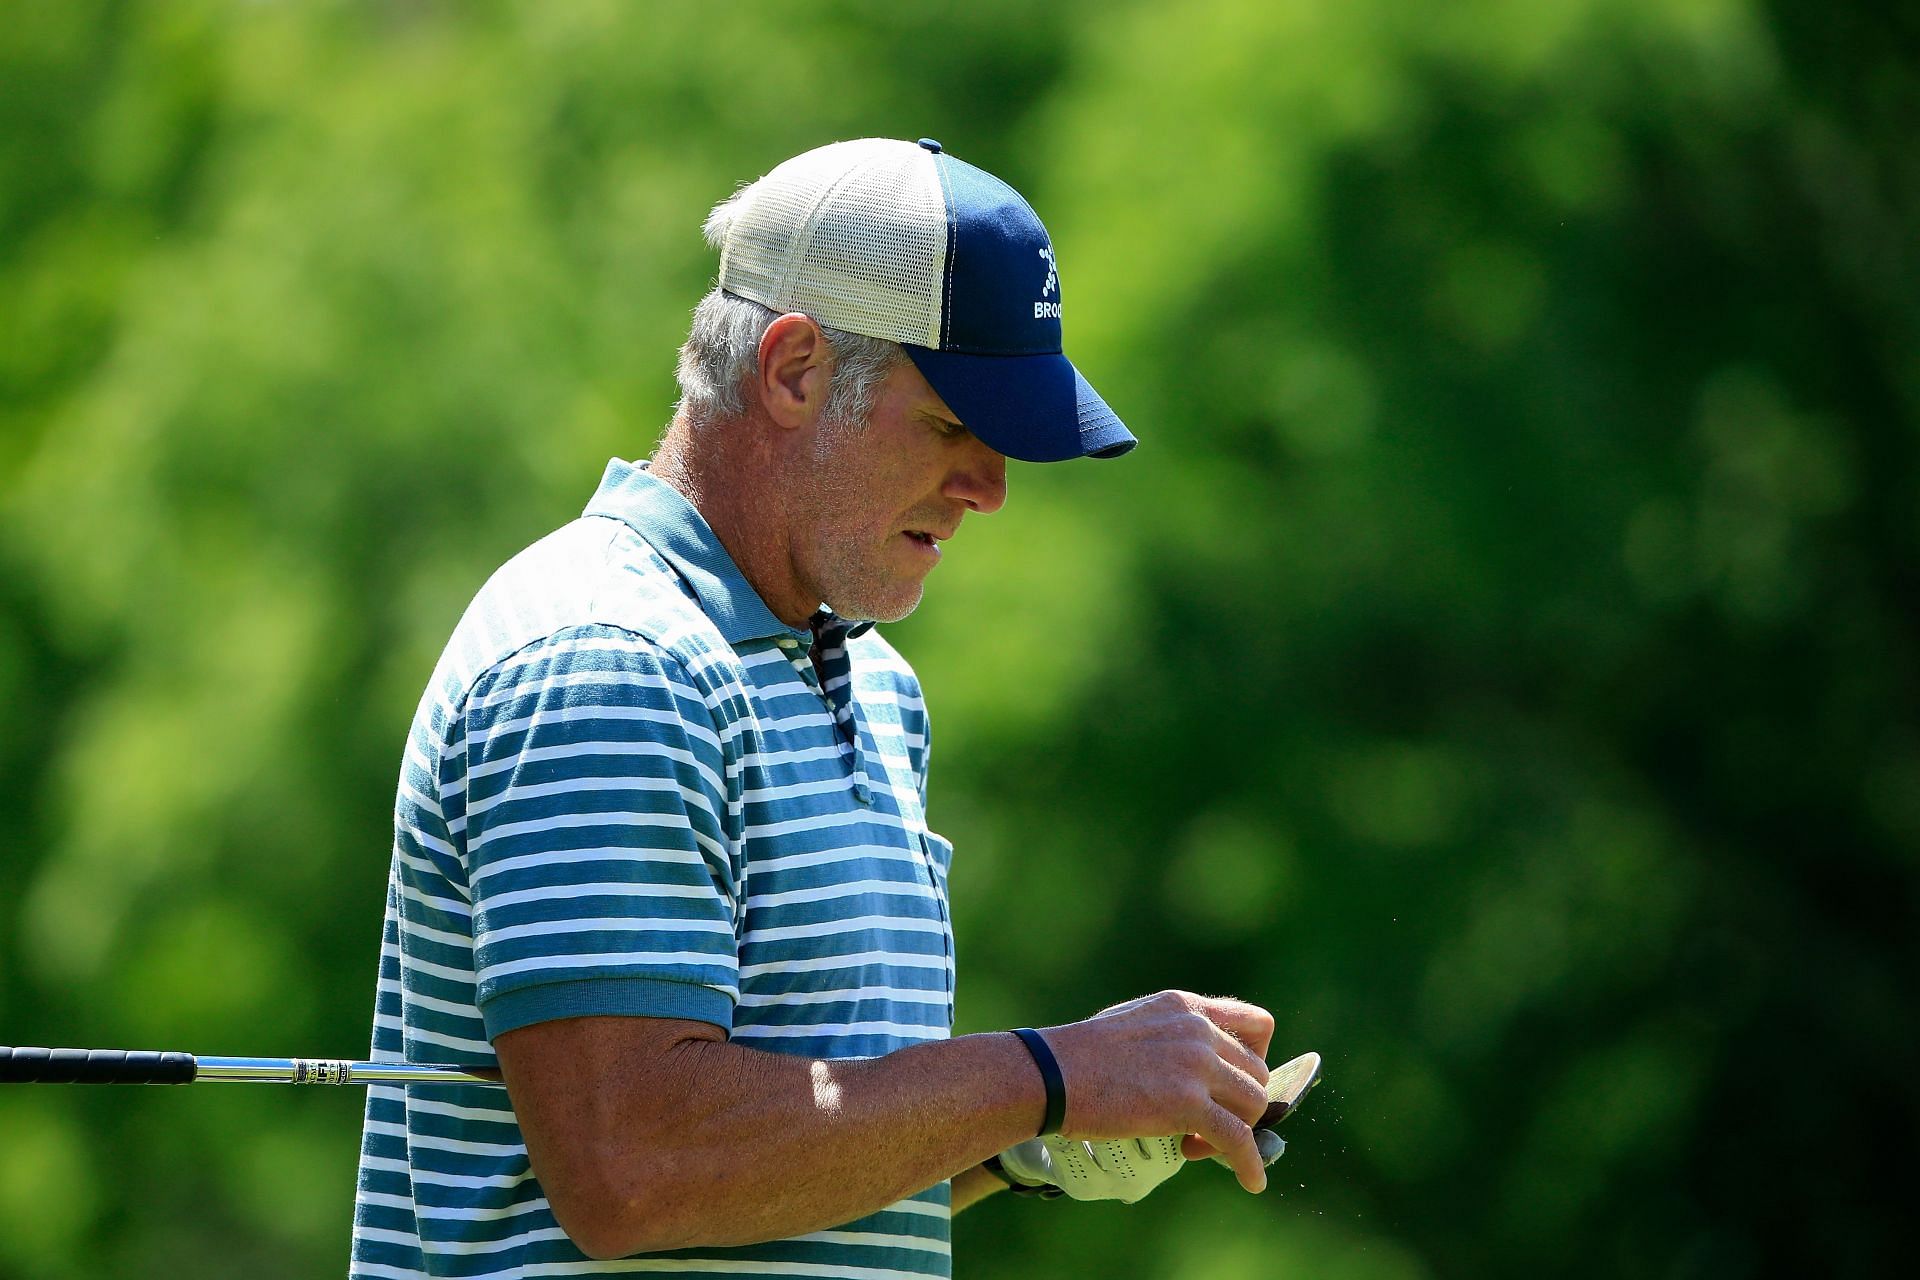 Brett Favre at the American Family Insurance Championship - Round Two